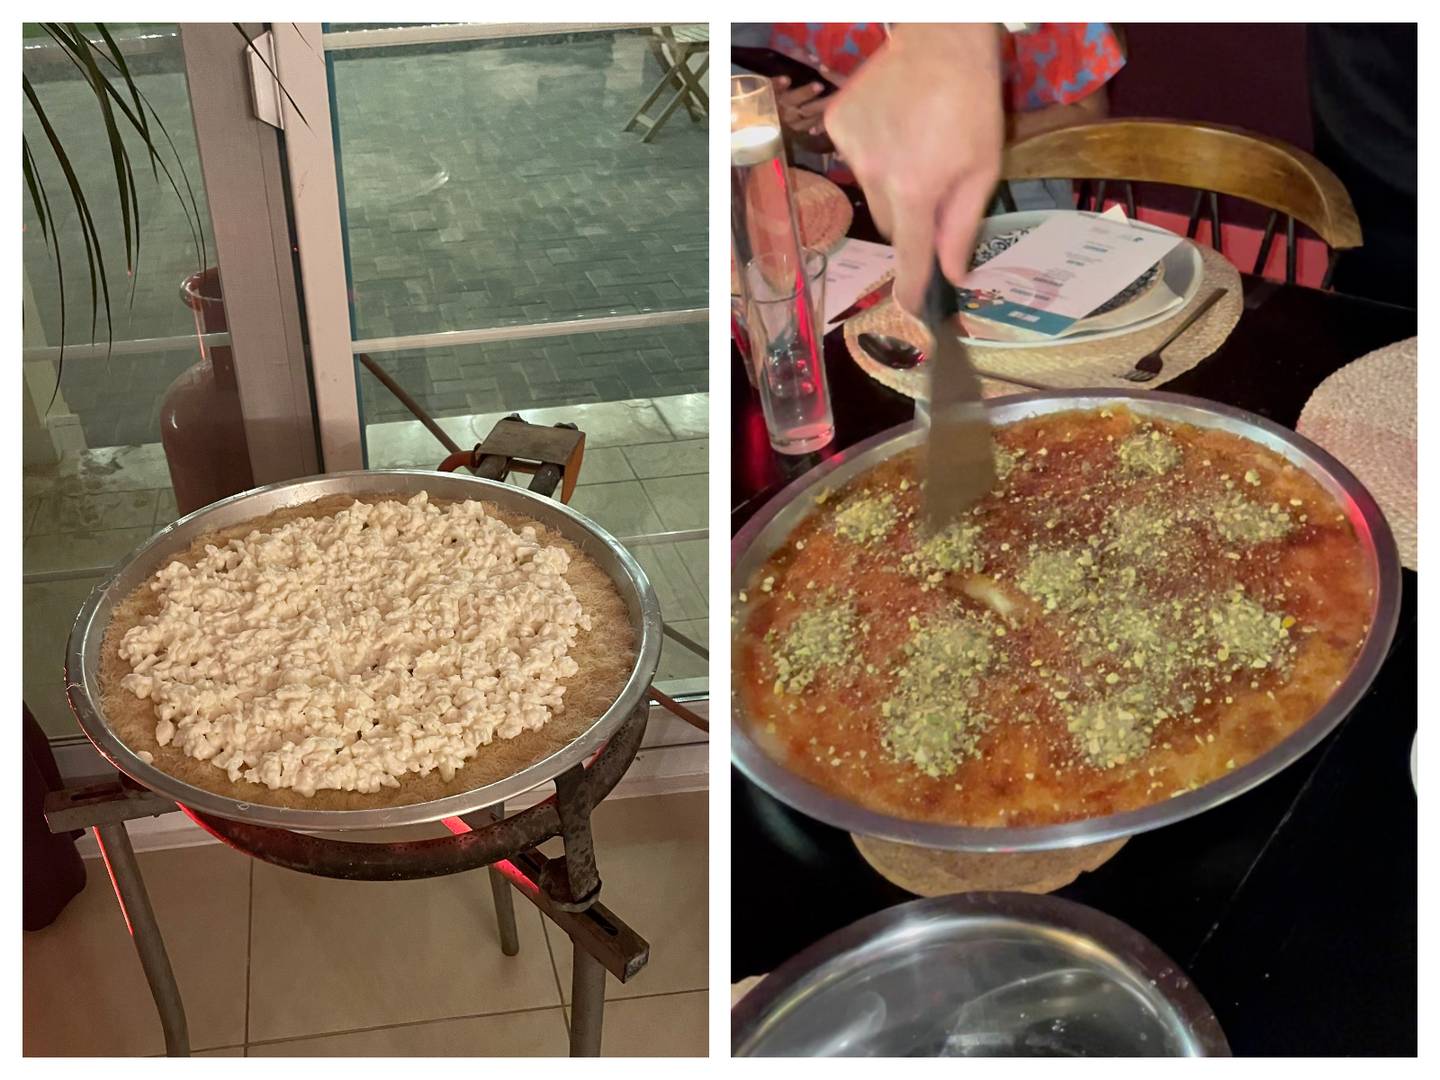 Left, knafeh with Nabulsi cheese on the cooker usually reserved for paella; right, chef Halawa's favourite knafeh Nabulsiyeh garnished with pistachios. Photo: Panna Munyal / The National